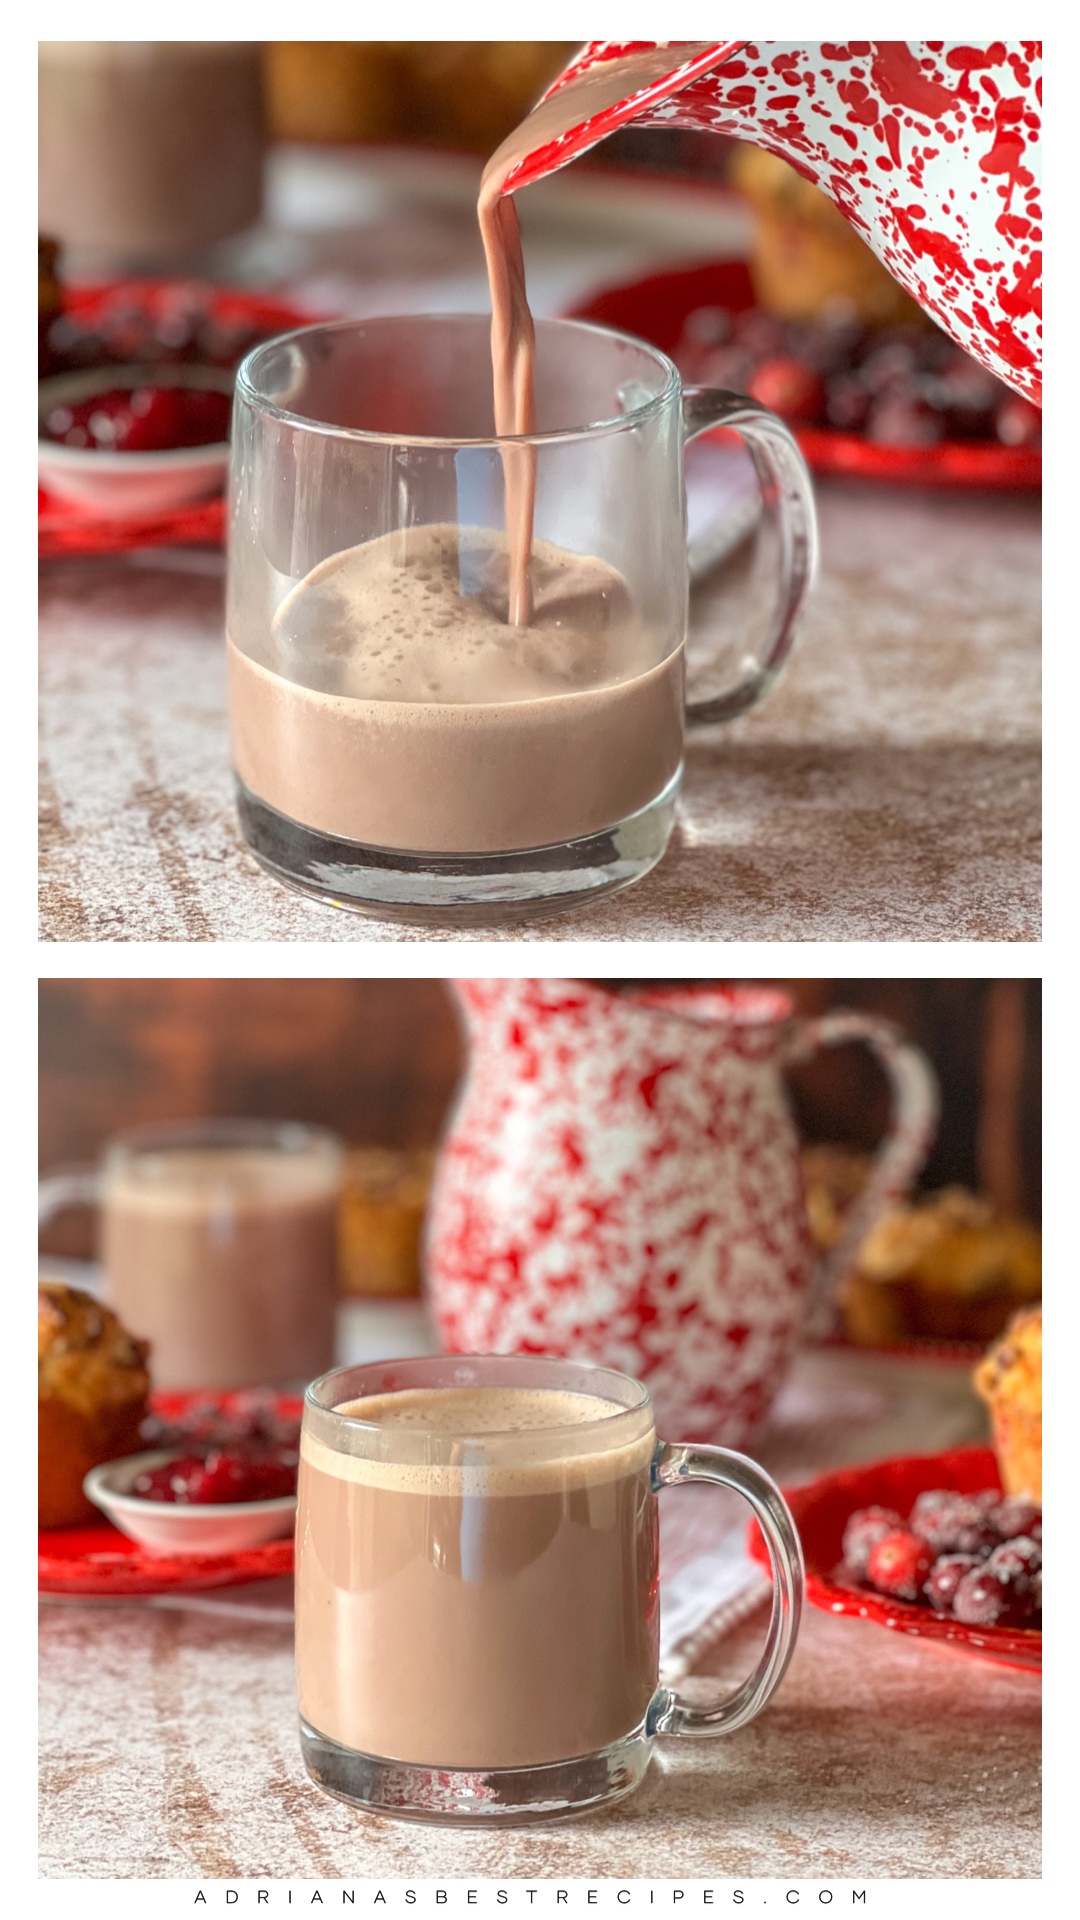 Mexican style hot chocolate with frothy consistency